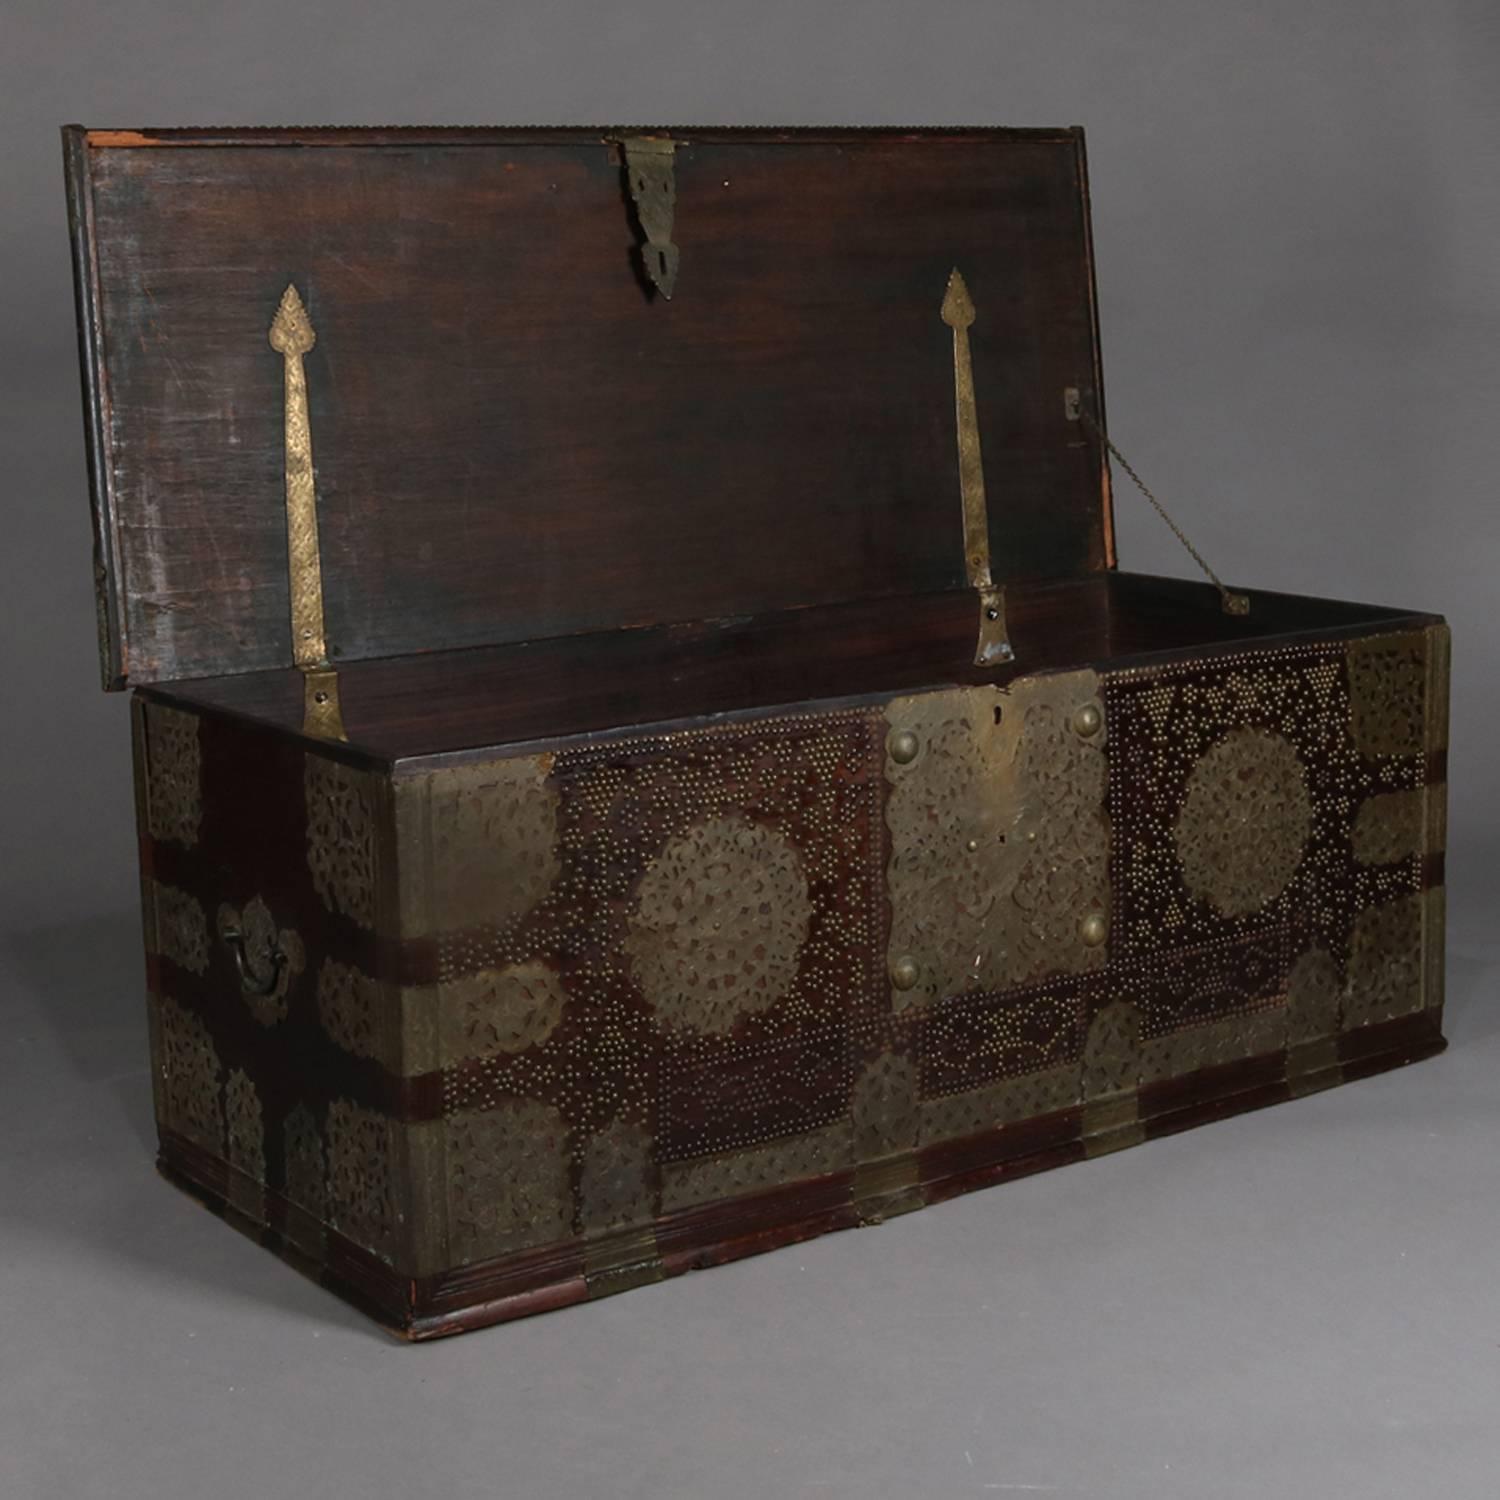 Antique Turkish marital groom's trunk features rosewood construction; floral pierced and embossed brass reserves, straps, hinges, handles and hasp; patterned design in brass tacks including church or mosque; early 19th century.

Measures: 23